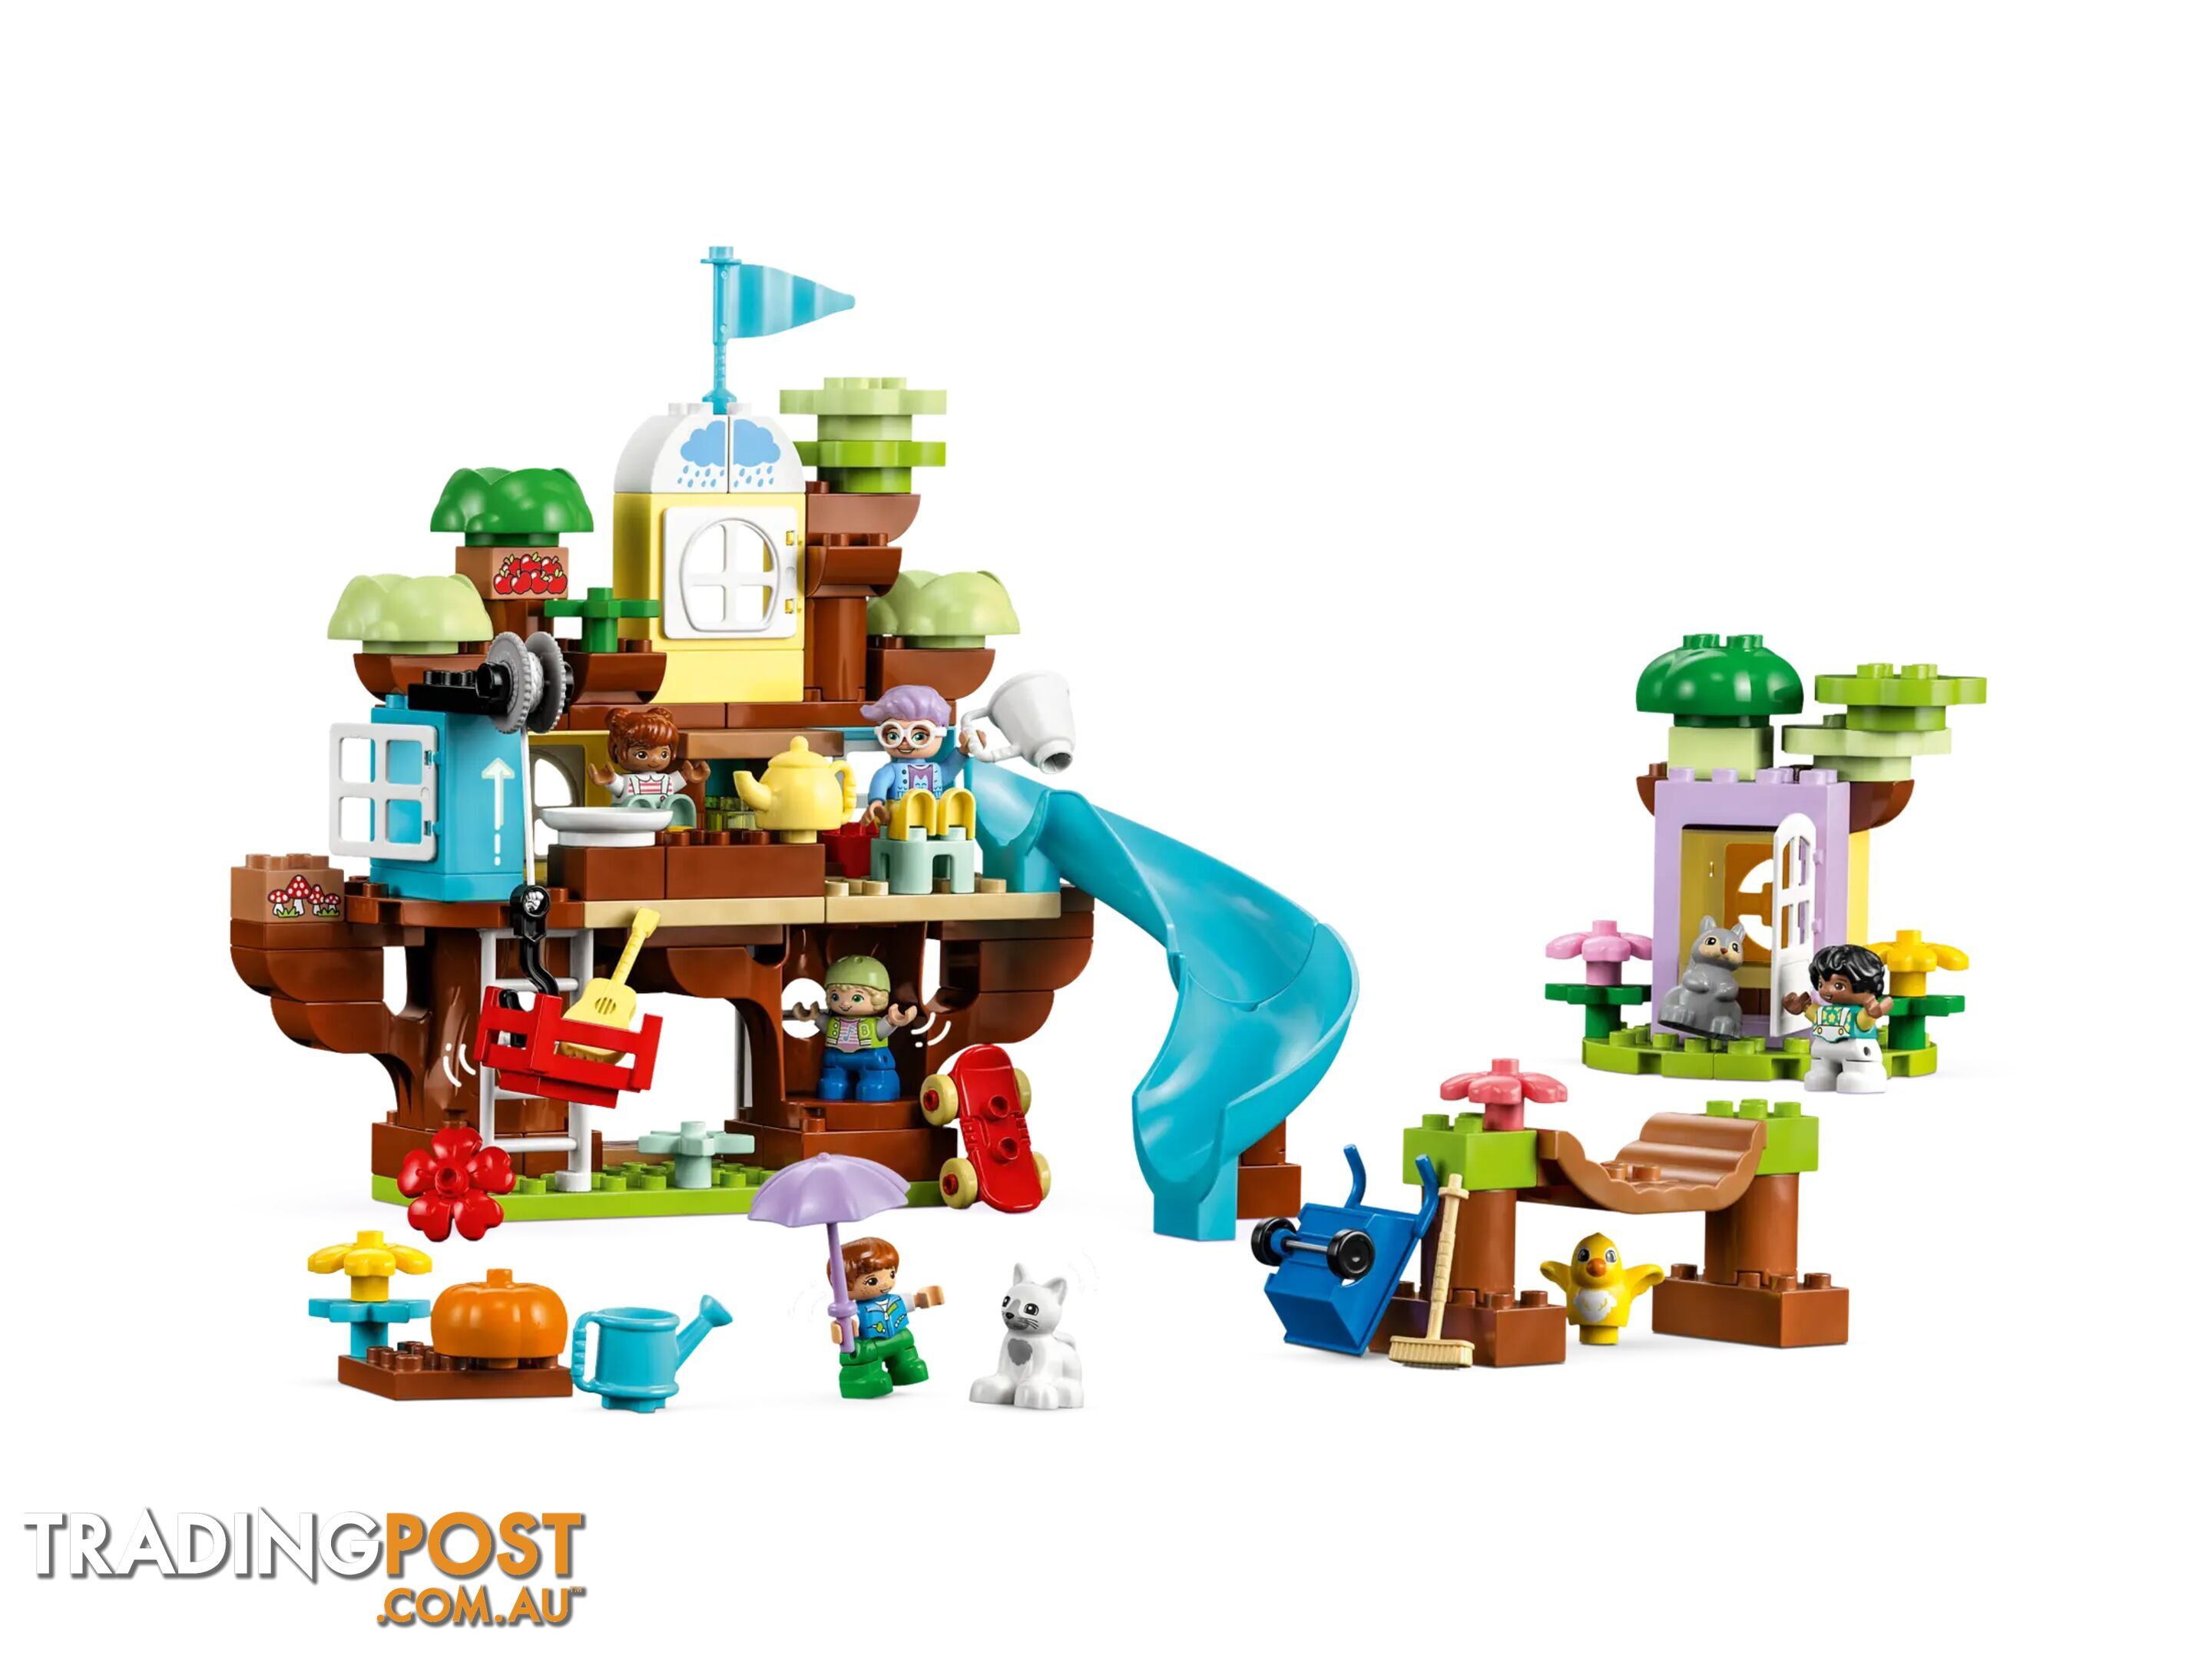 LEGO 10993 3in1 Tree House - Duplo - 5702017417714